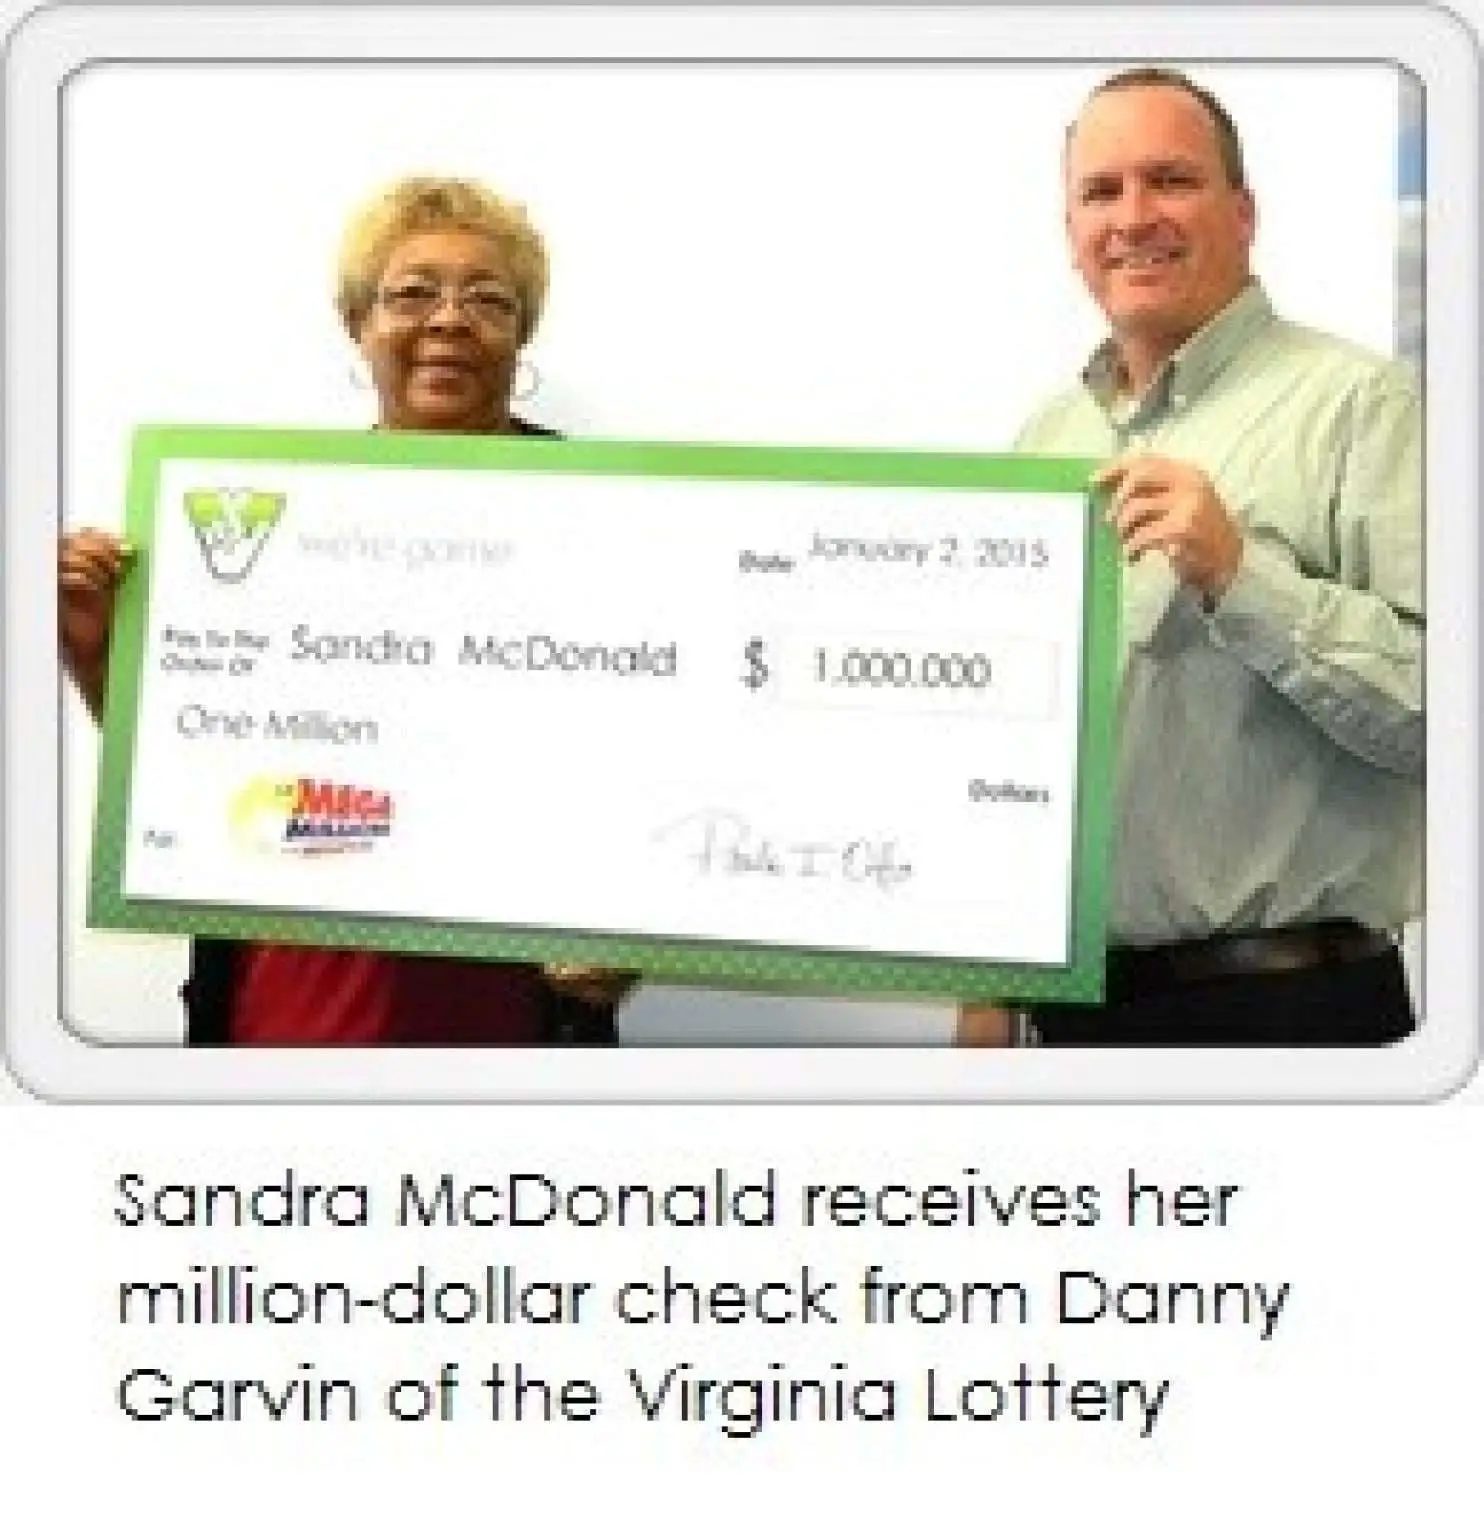 Woodbridge woman couldnt sleep, checked lottery ticket and finds she ...